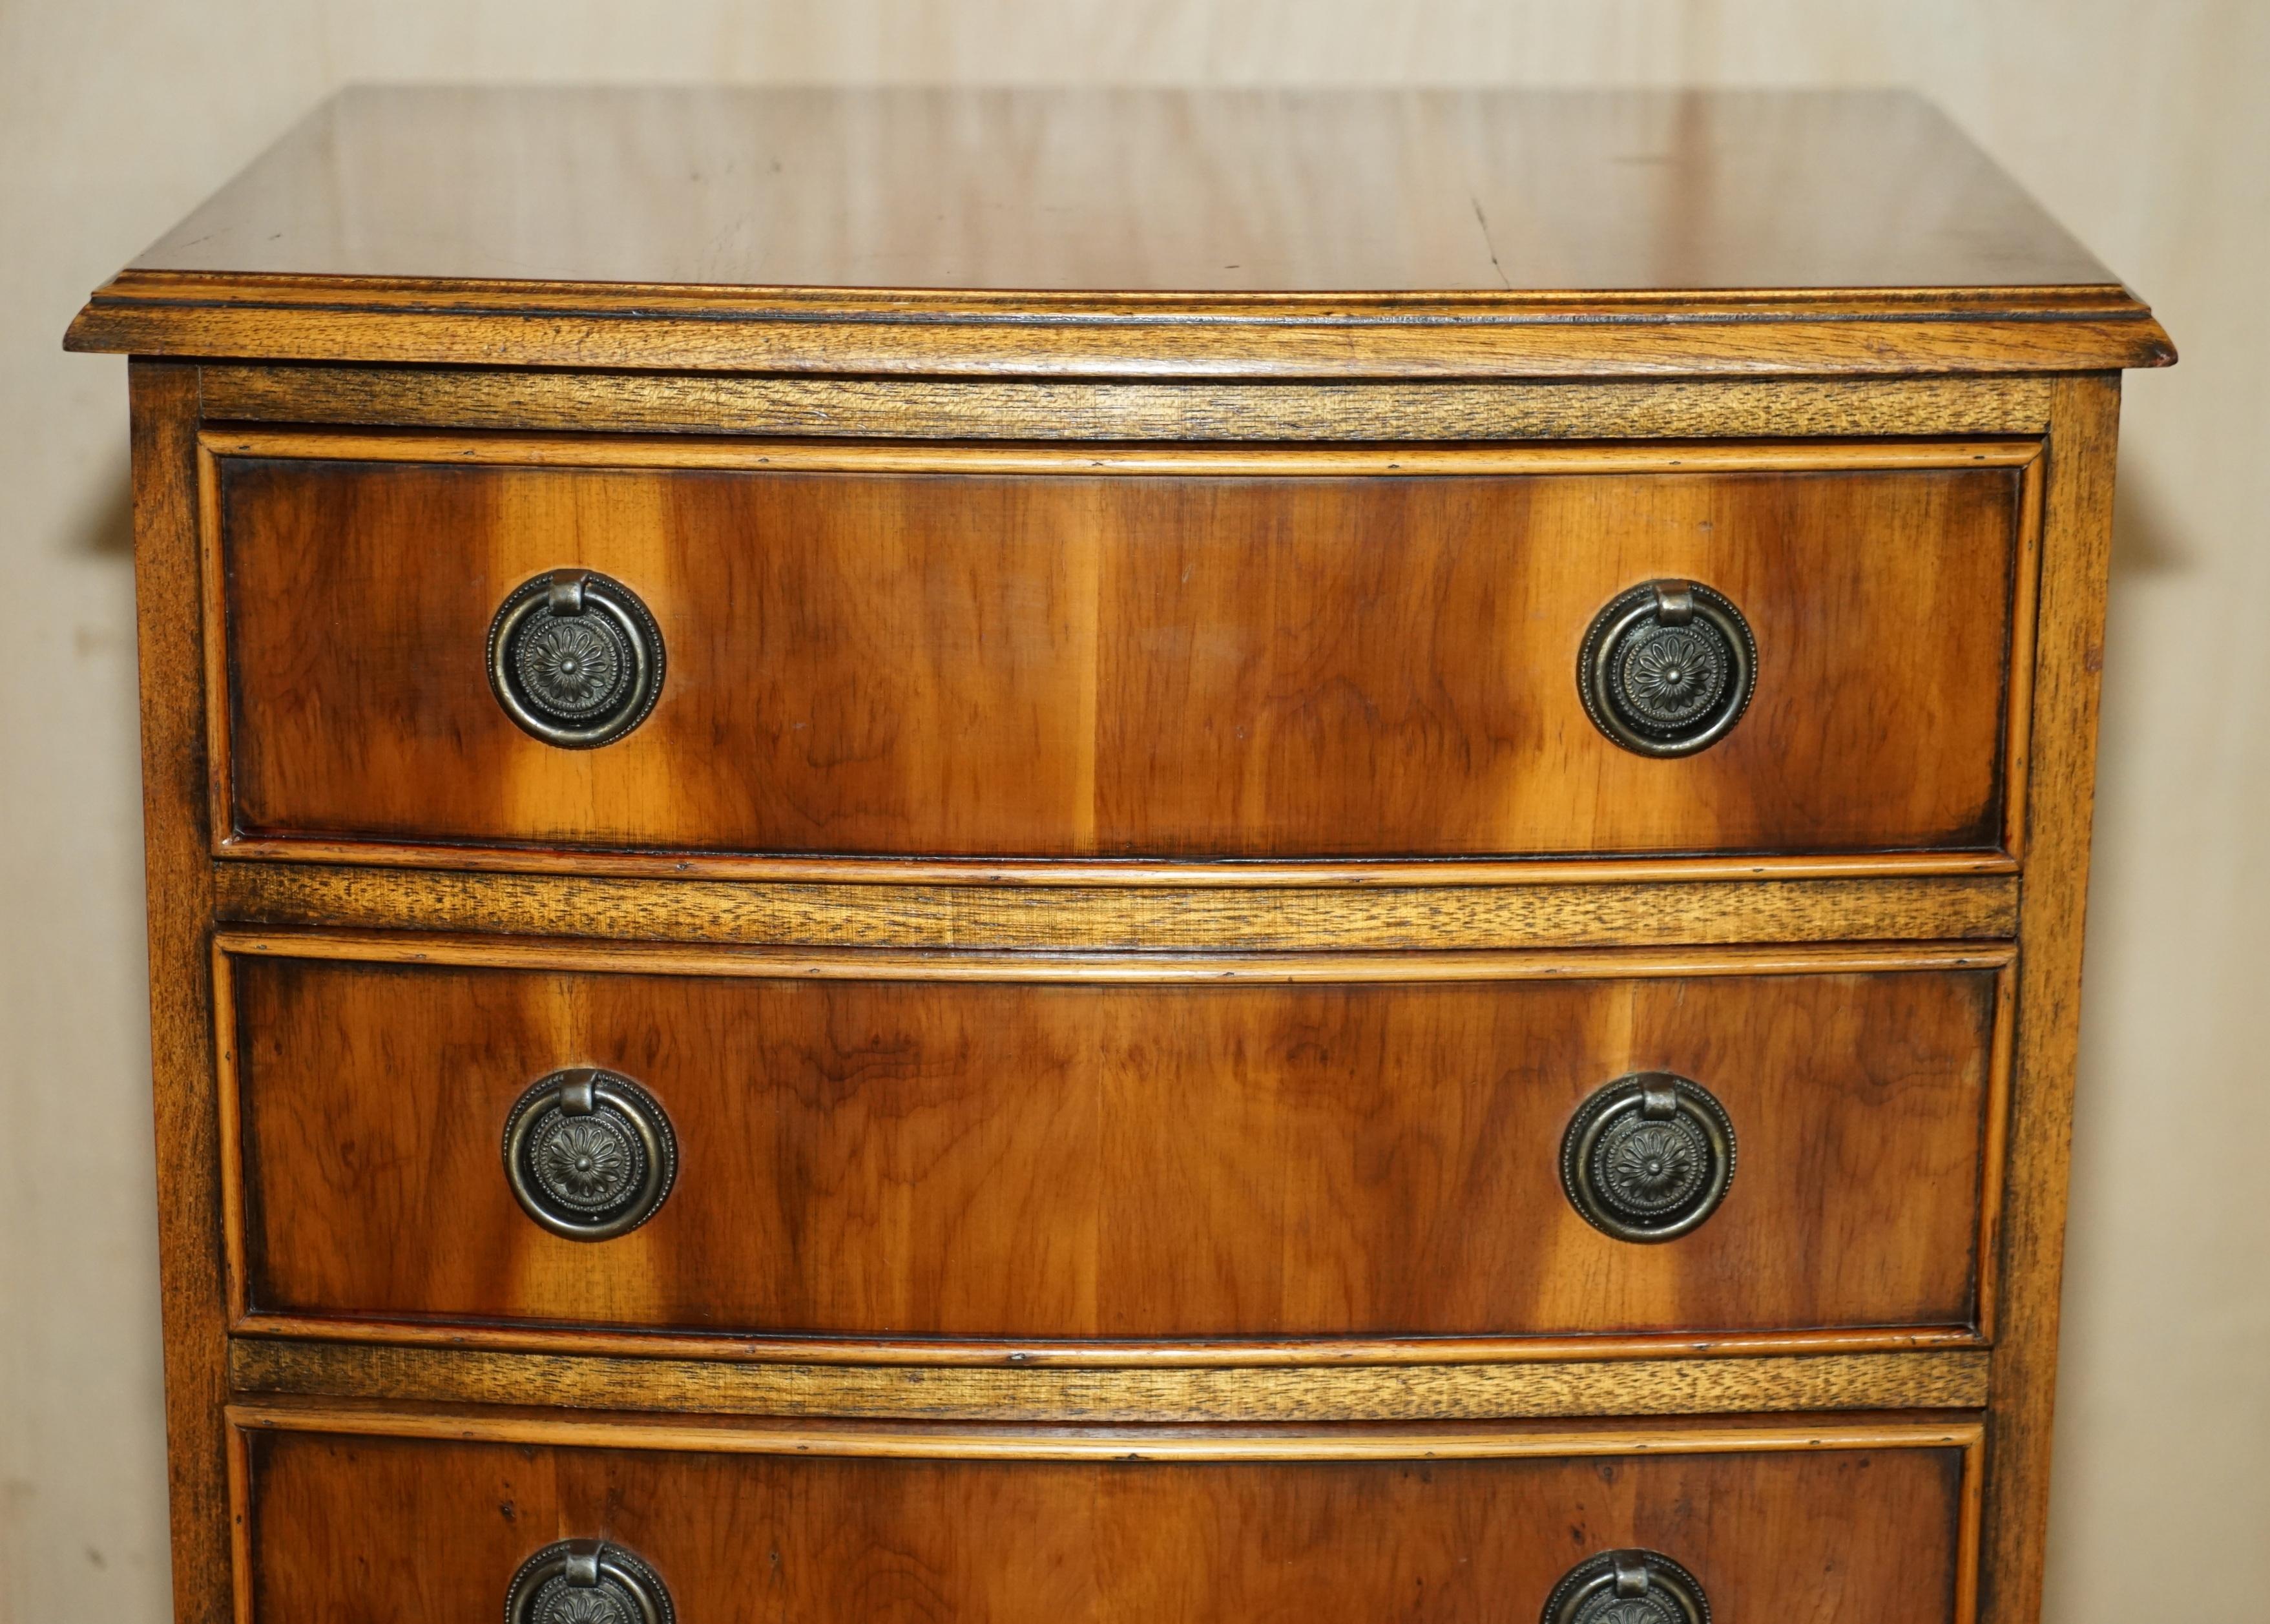 CIRCA 1940''s BURR YEW WOOD BOW FRONTED BEDSIDE SIDE TABLE CHEST OF DRAWERS en vente 2